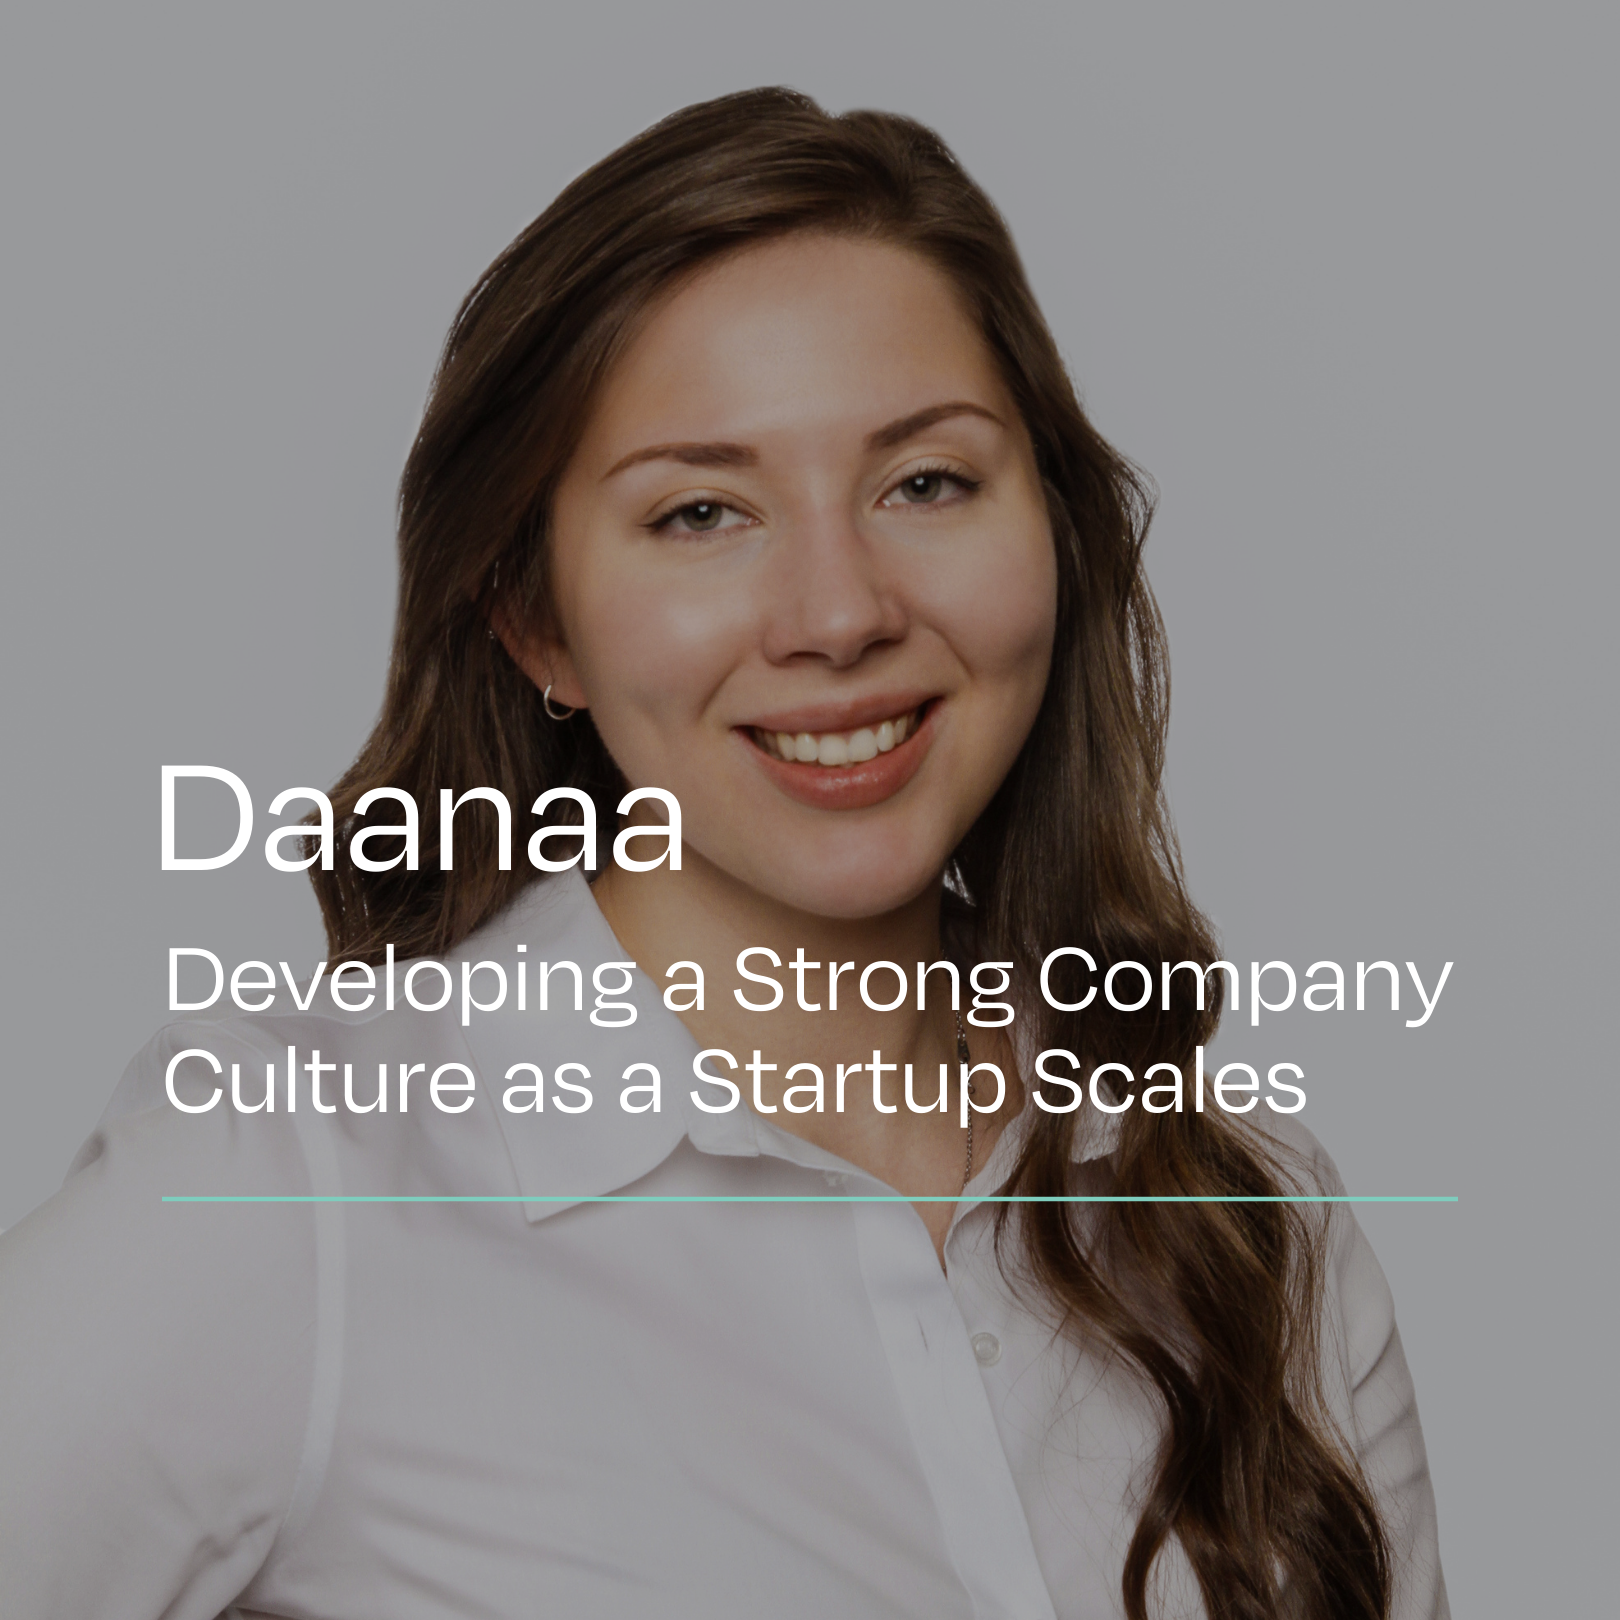 Daanaa – Developing a Strong Company Culture as a Startup Scales